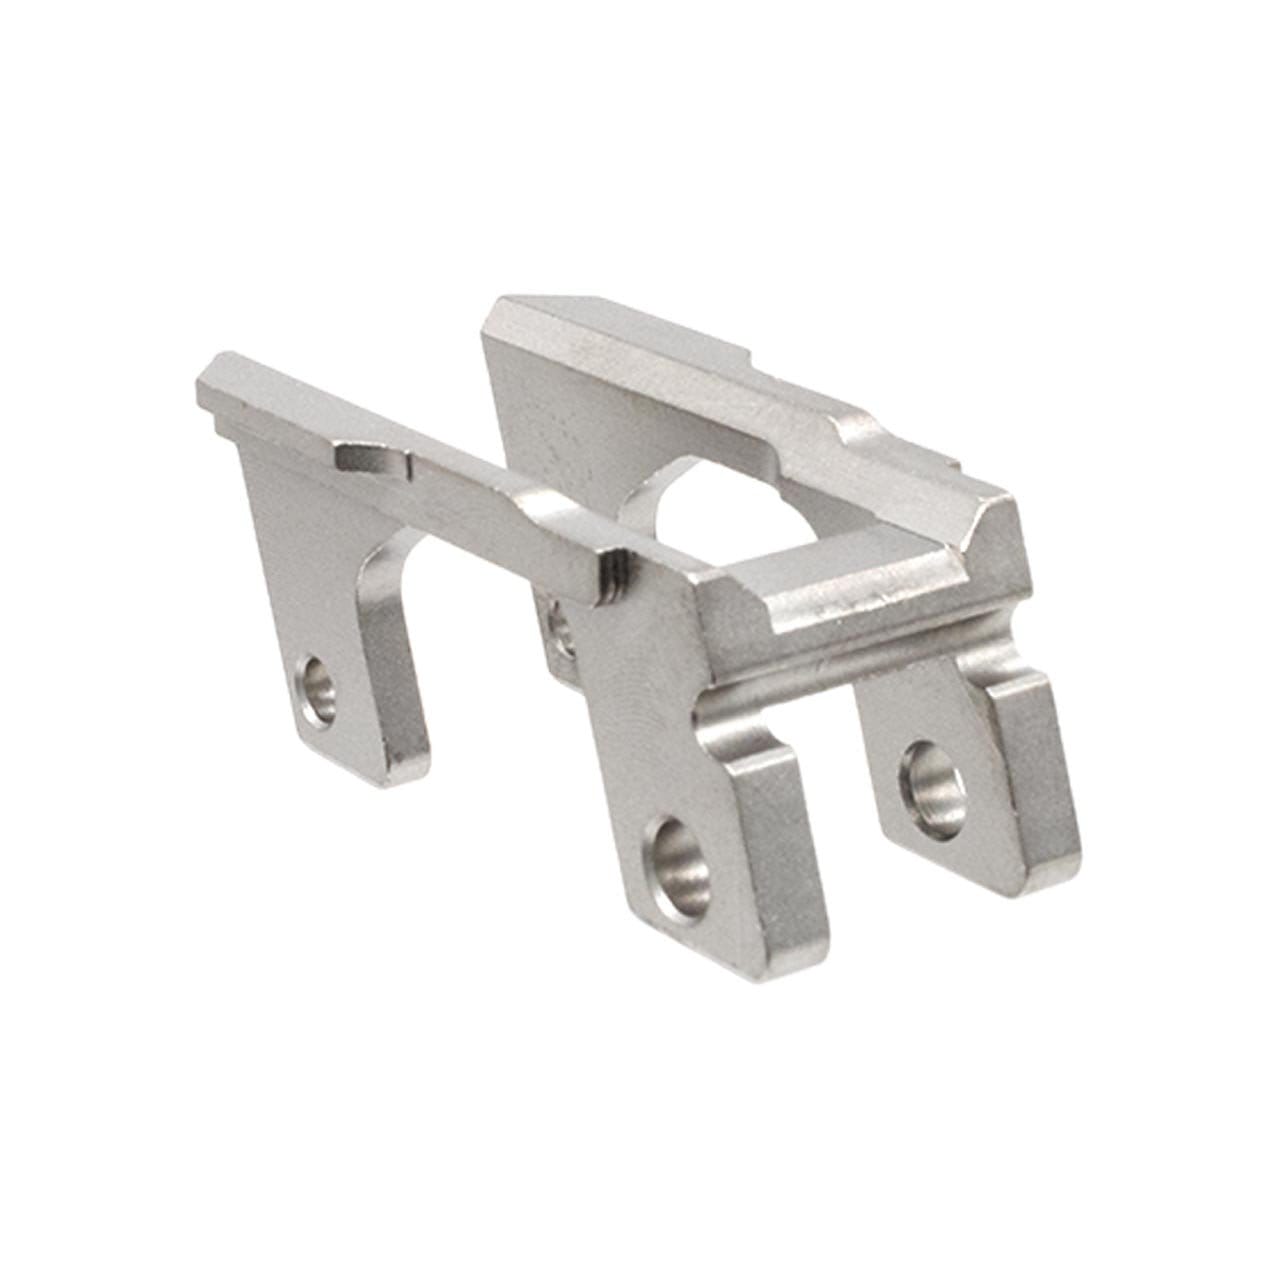 Image of ROOK Tactical Front Locking Block Upgrade - Stainless Steel (Fits Polymer 80 PF940C and Strike 80)